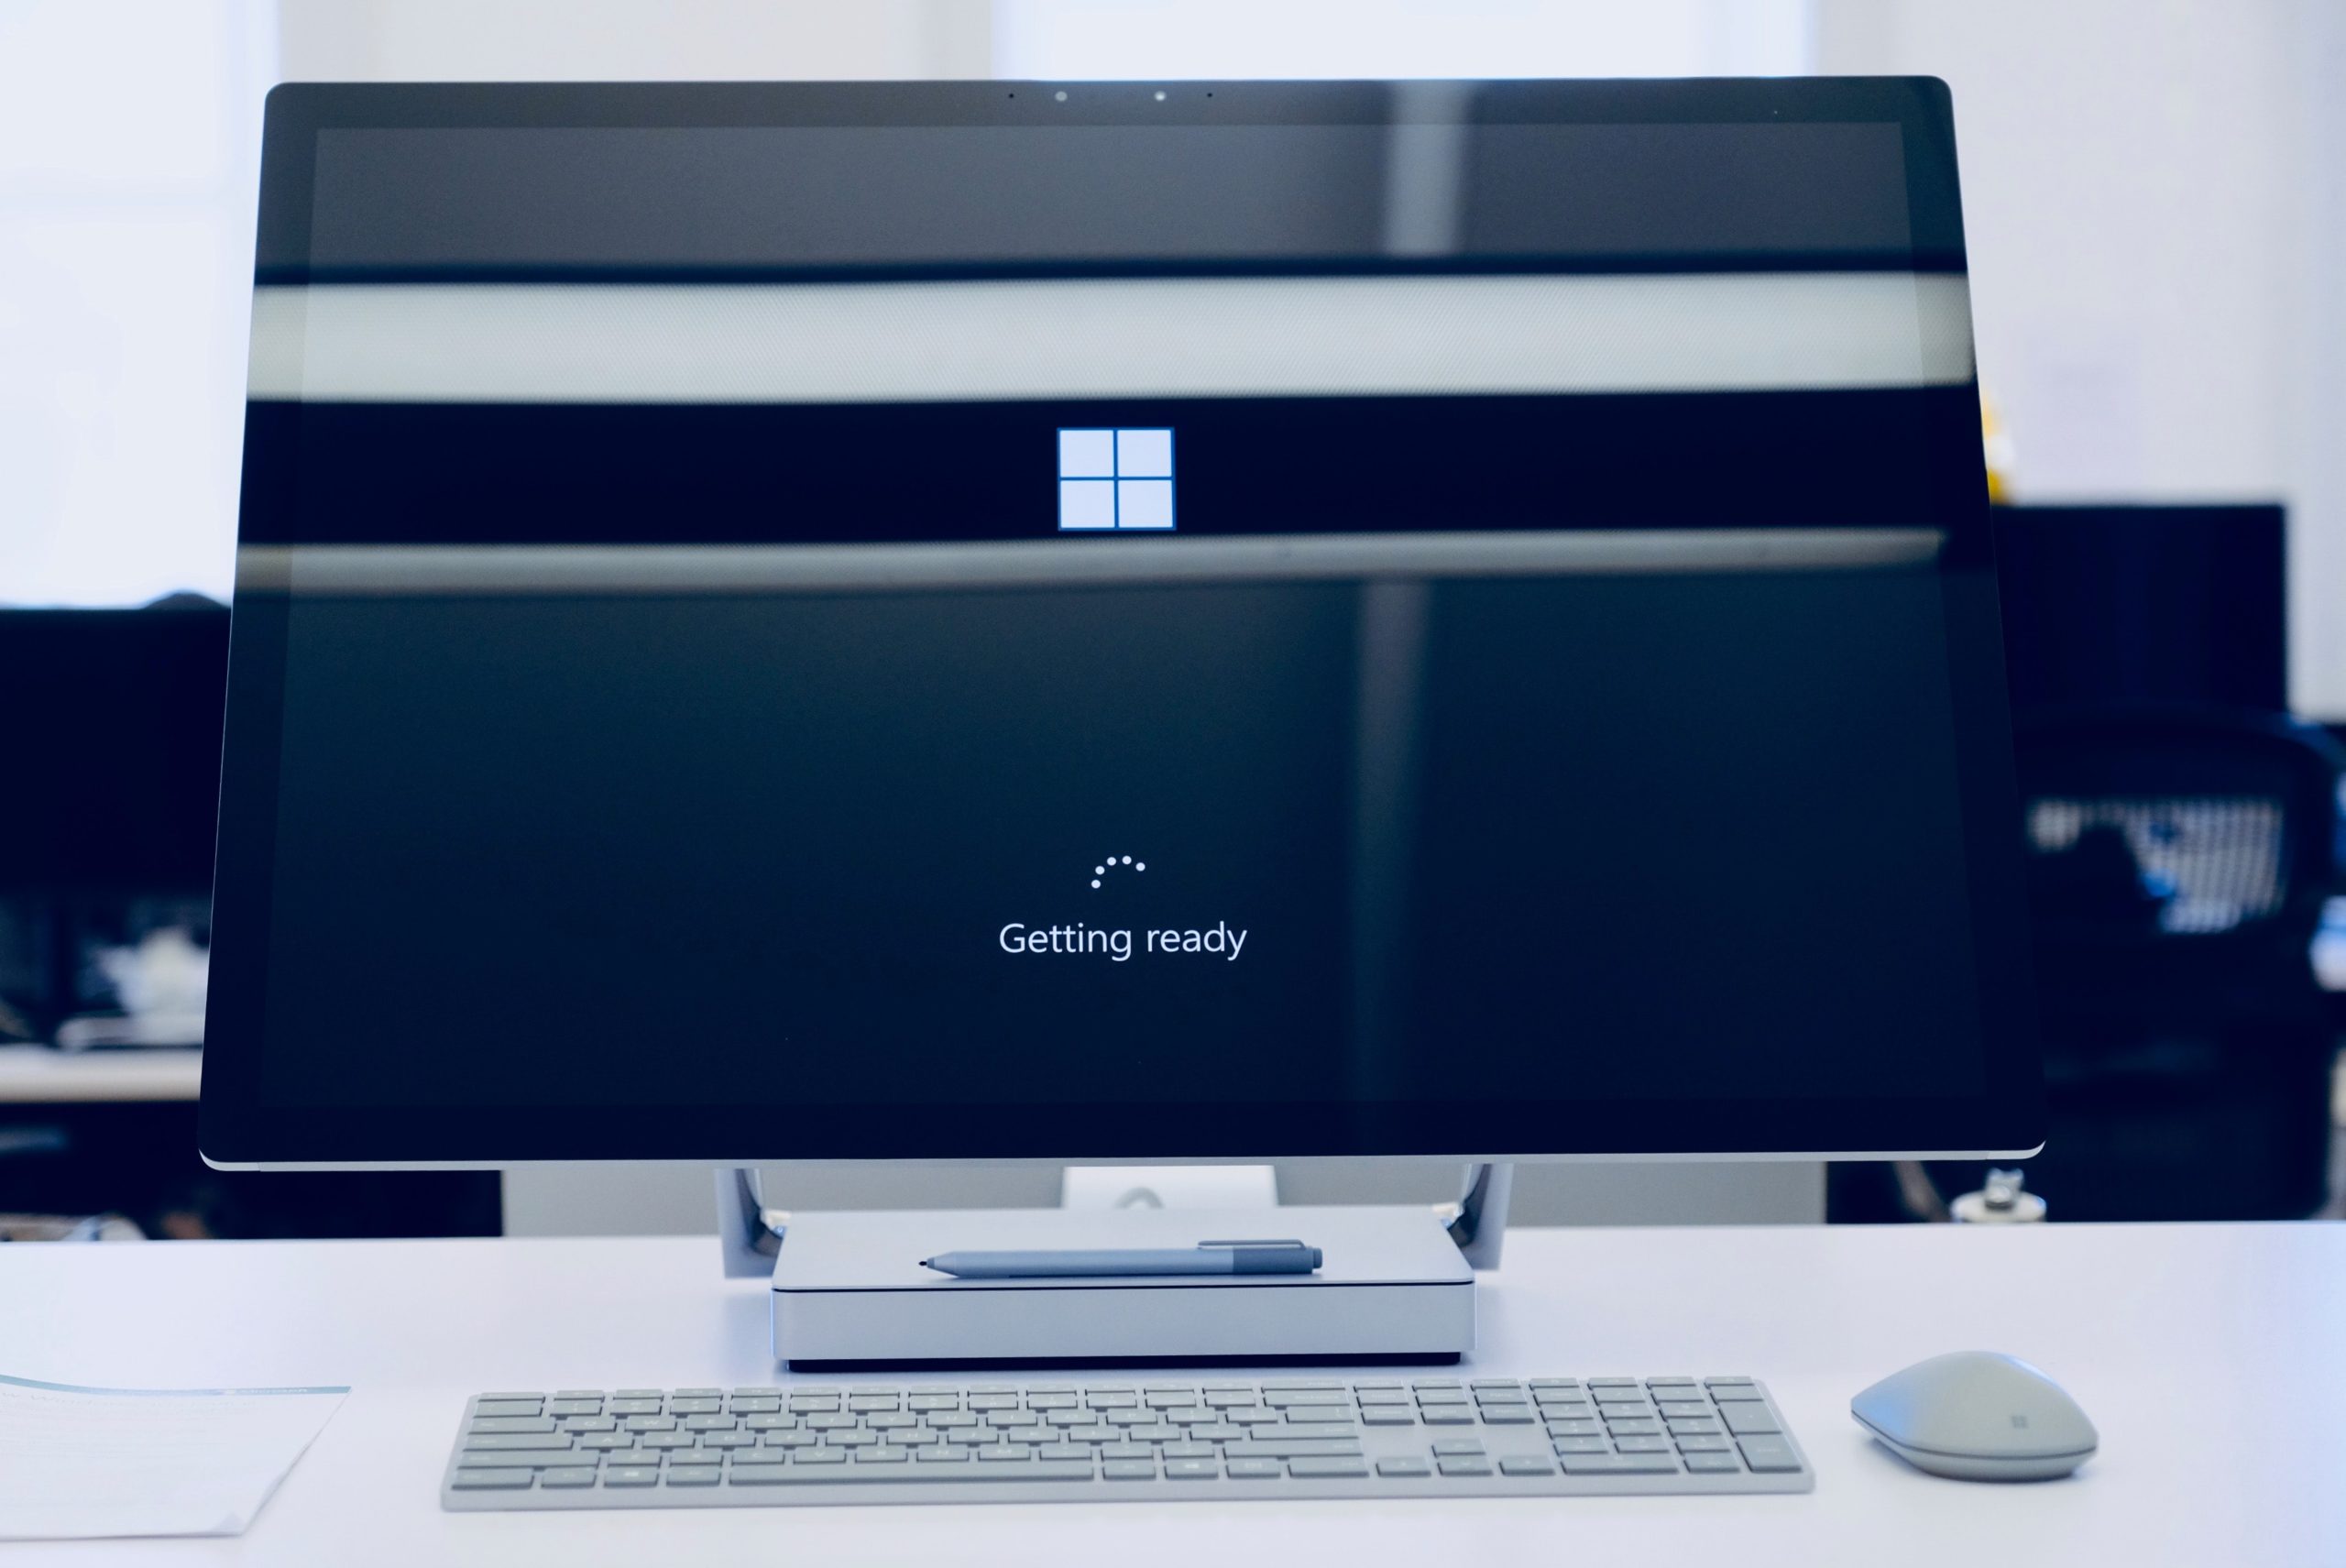 Image of Computer with Getting Ready while waiting for Windows 11 upgrade to install